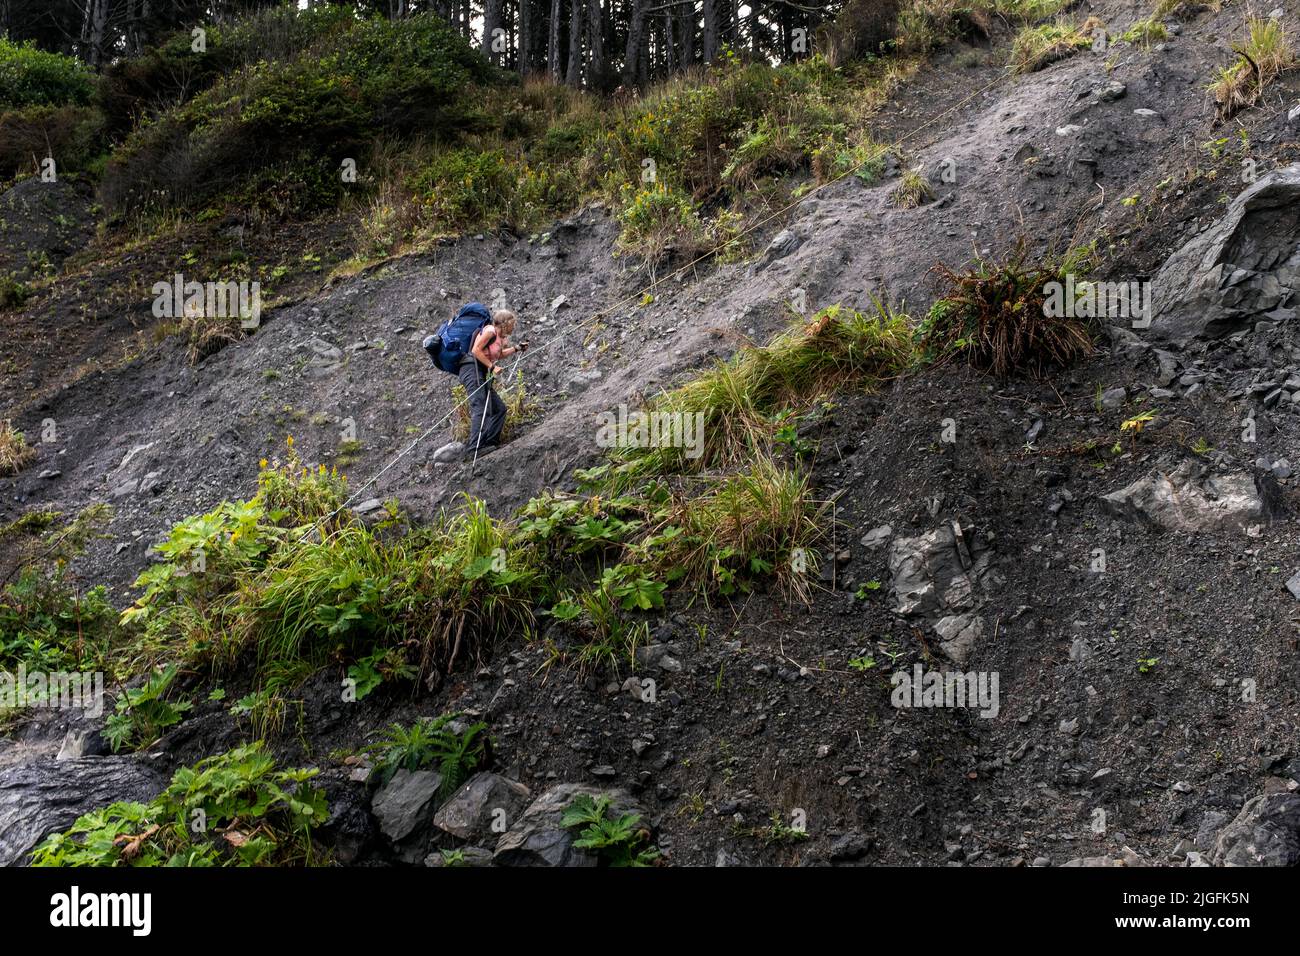 WA20558-00....WASHINGTON - Backpacker crossing a muddy beach head with the aid of a rope in Olympic National Park. MR# S1 Stock Photo